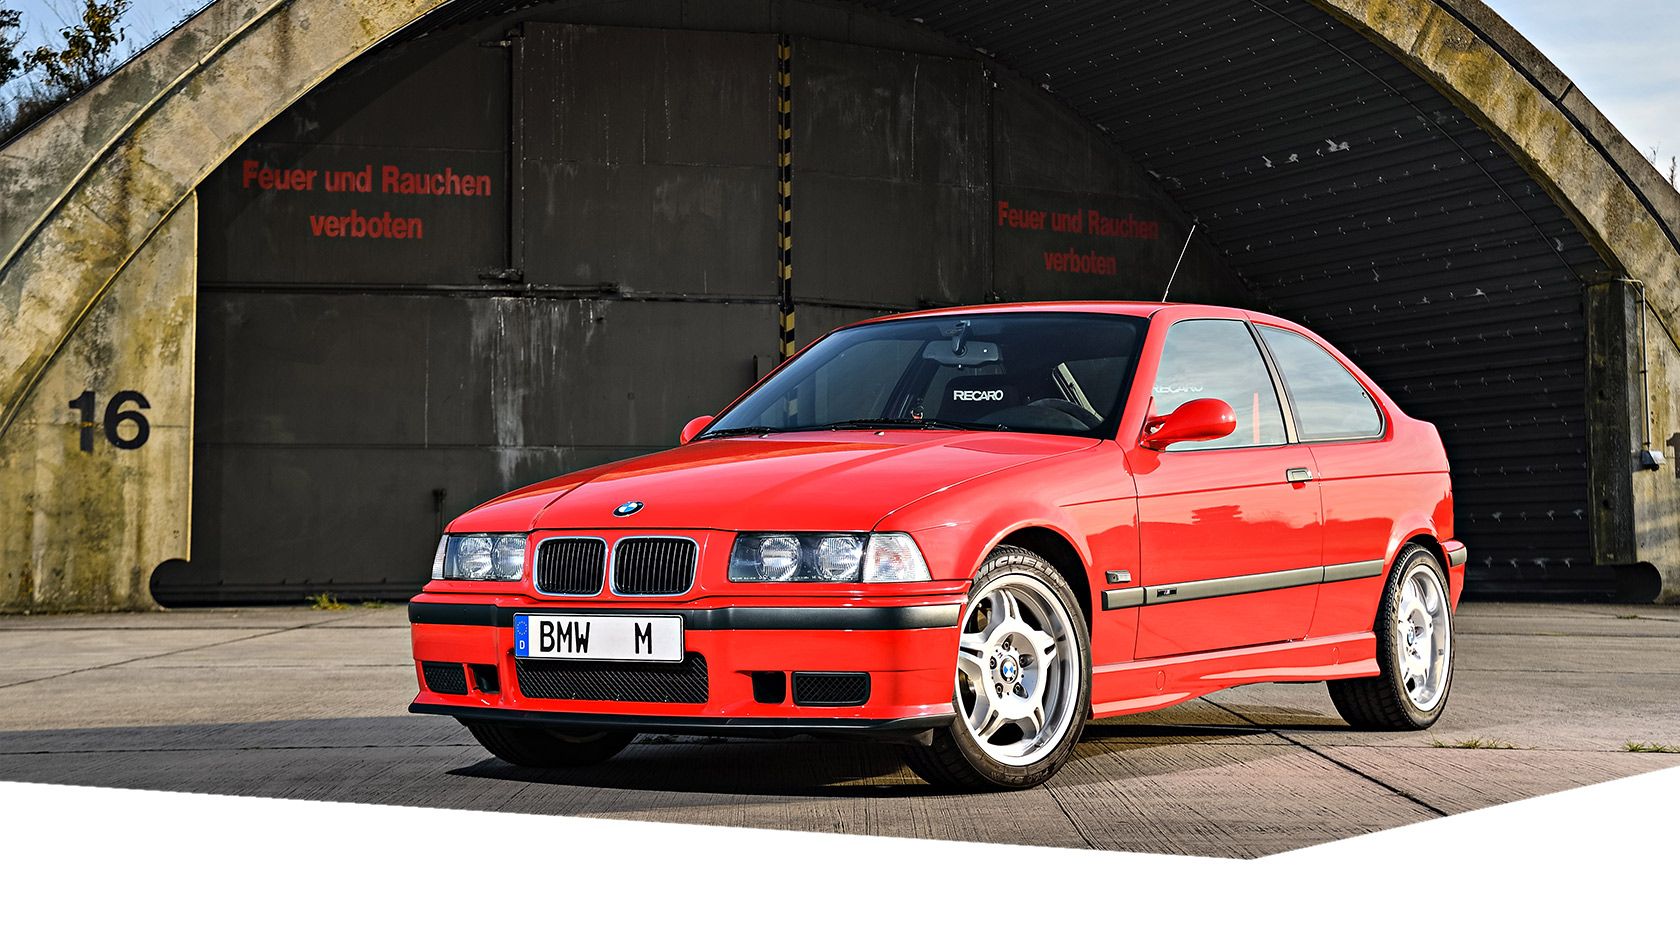 bmw-m3-e36-compact-stage-teaser.jpg